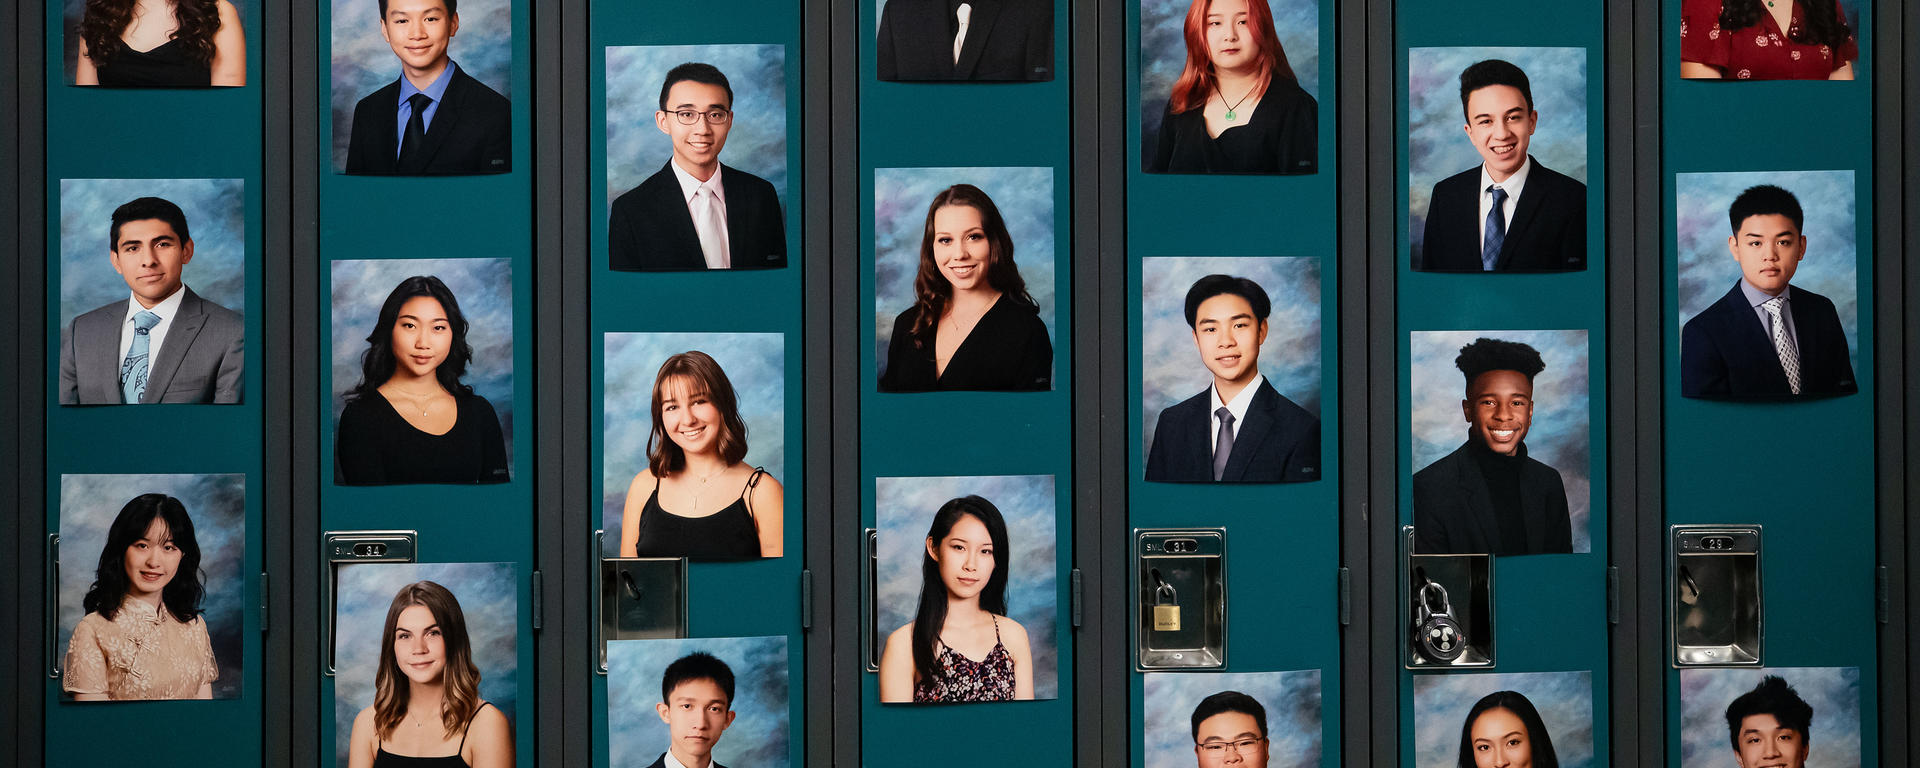 Photos of graduating students are seen on lockers during a graduation ceremony.